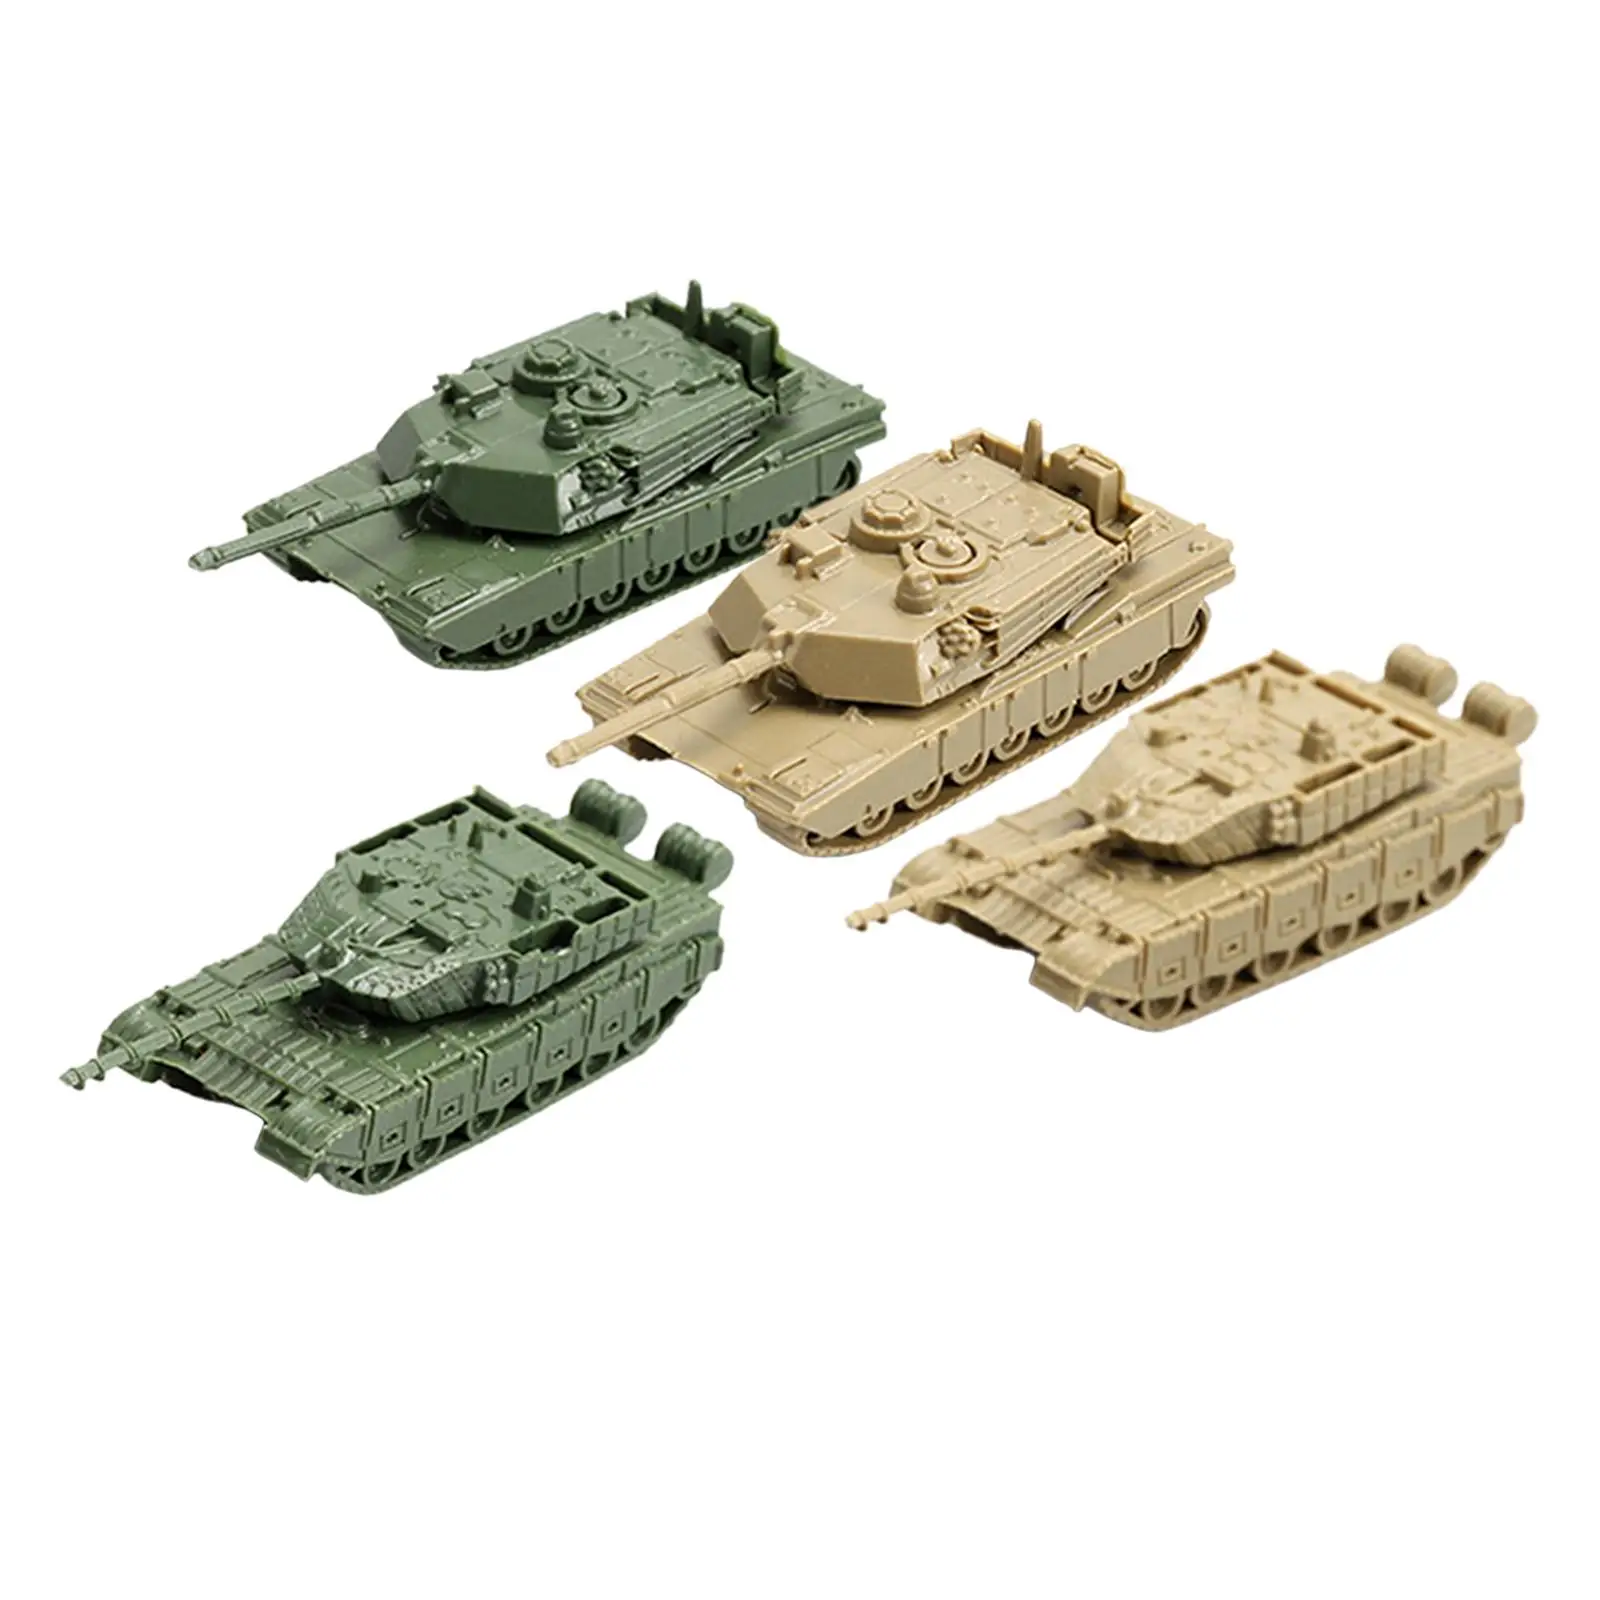 1:144 Scale Static Tanks Ornaments Collectibles Party Favors Toy Building Kits Paper Craft 3D Puzzle for Boy and Girl Beginners